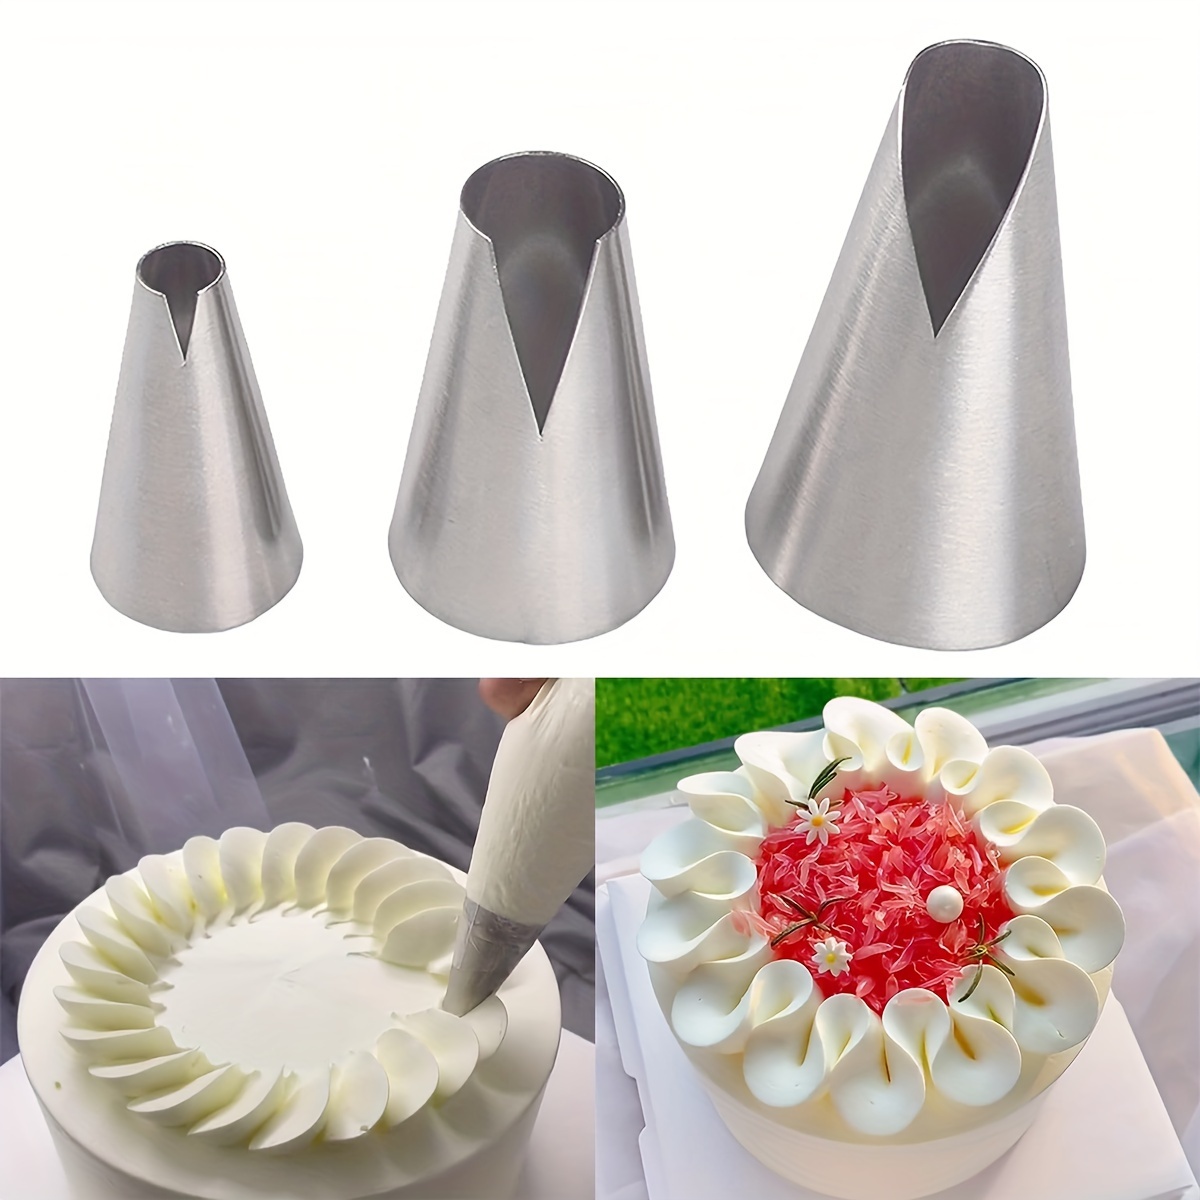 

3 Pcs Russian Piping Tips Set, V-shaped Wave Nozzles Piping Kit For Pastry Cupcakes Cakes Decorating, Stainless Steel Kitchen Gadgets, Baking Supplies